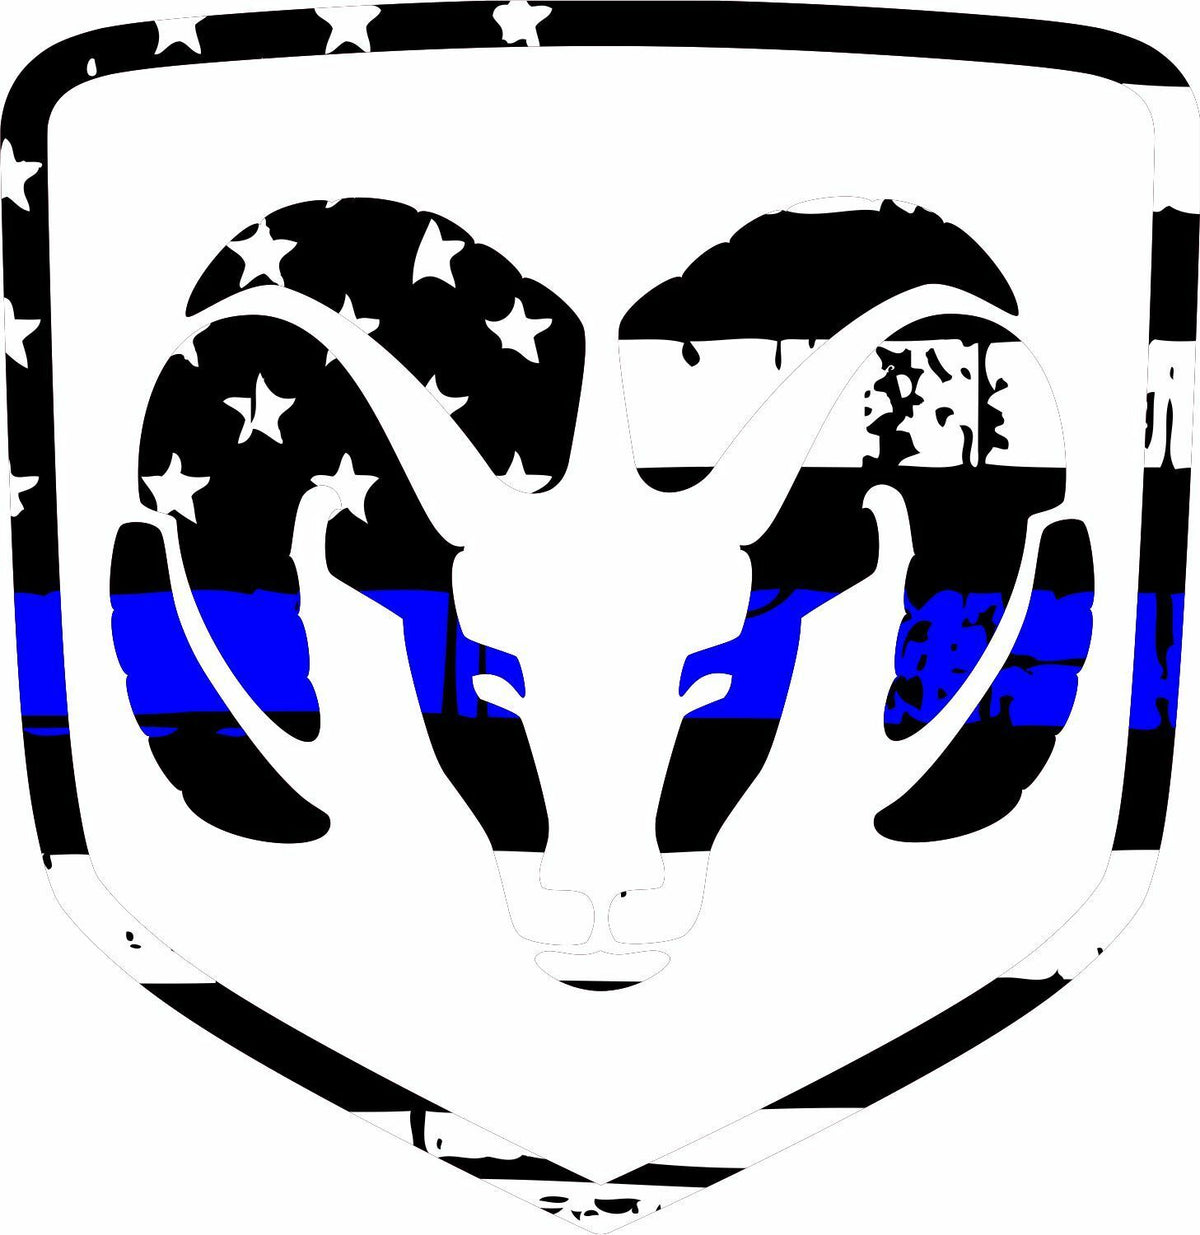 Thin Blue Line Decal-USA R*m Tattered Flag Blue Line Decal Various Sizes - Powercall Sirens LLC